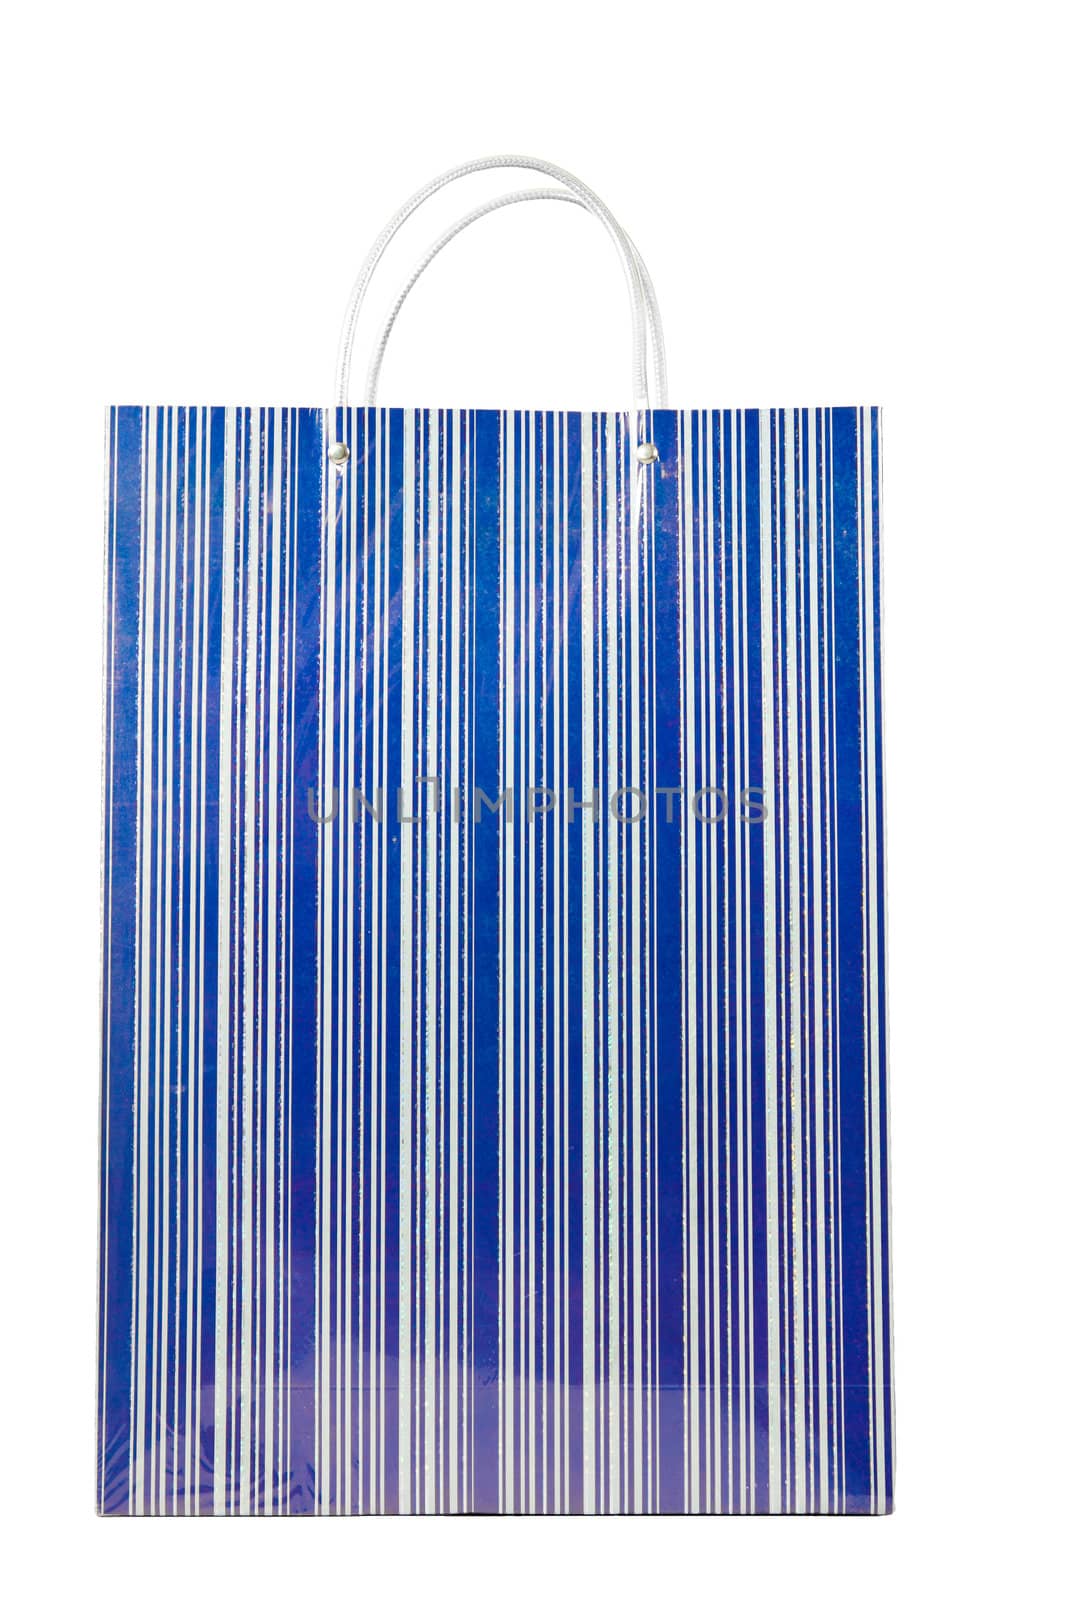 Blue shopping bag isolated over white. by Jaykayl